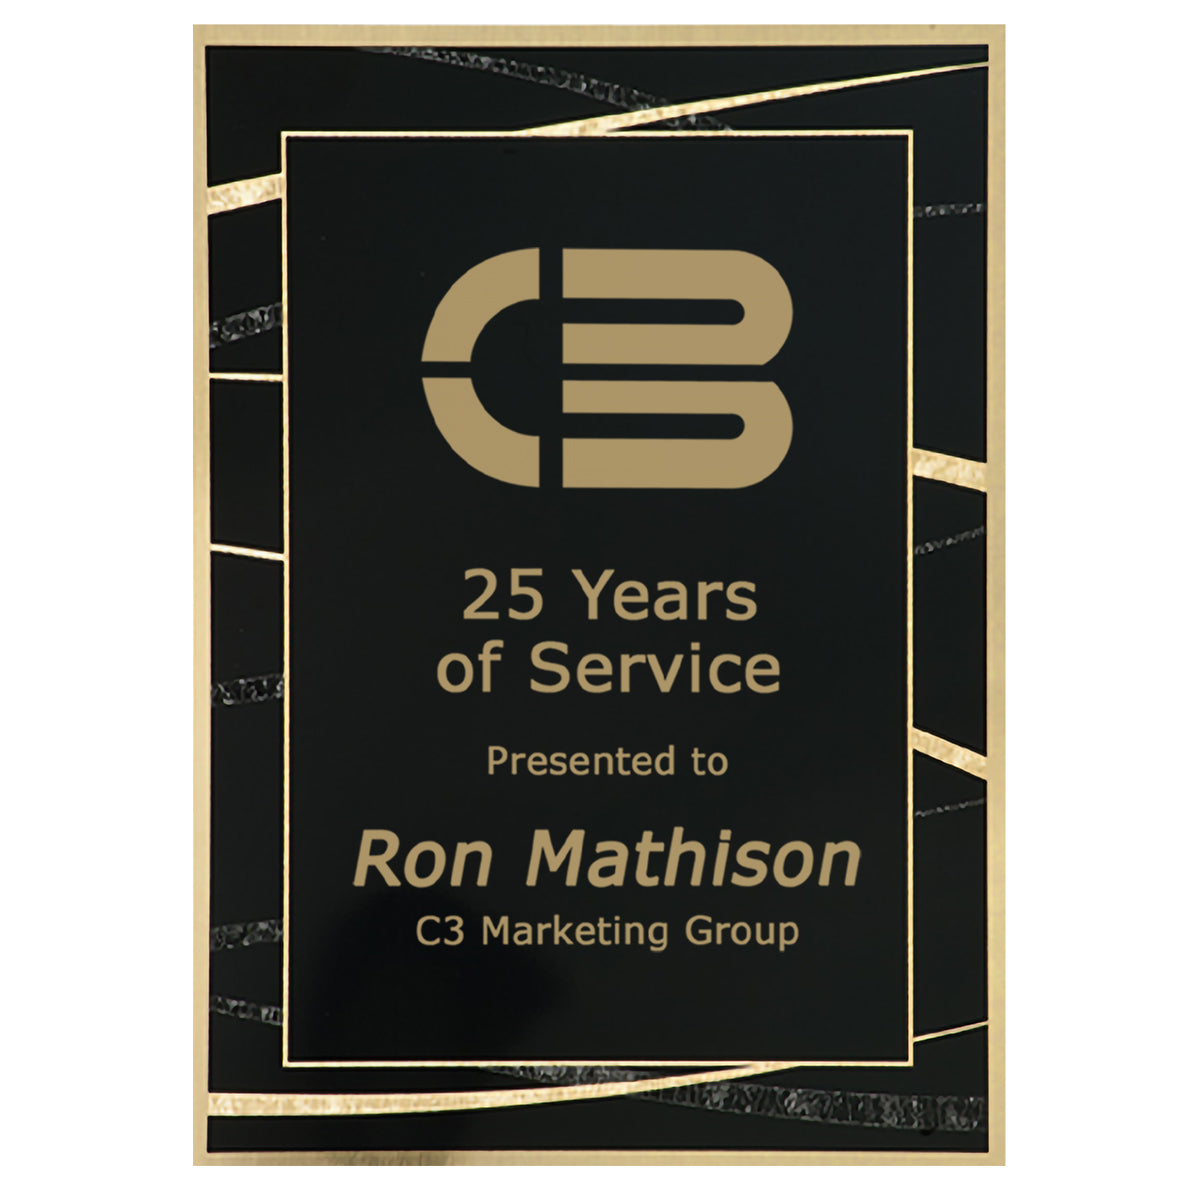 Brass Plated Steel Expression Plaque Plate, 5" x 7", Laser Engraved Plaque Plate Craftworks NW Black/Gold 